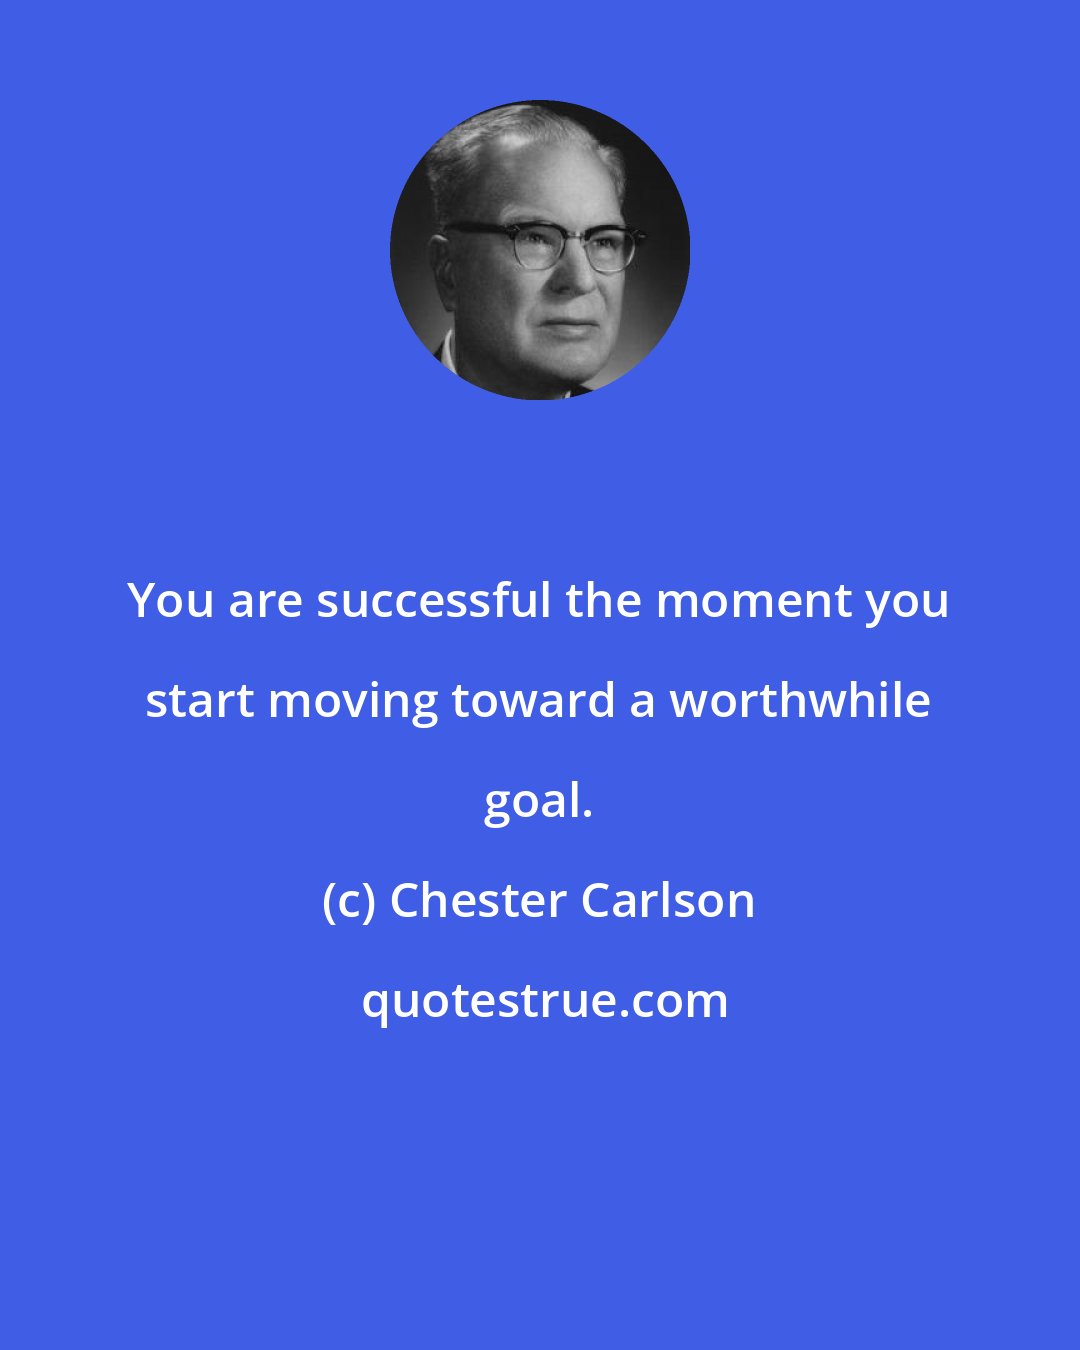 Chester Carlson: You are successful the moment you start moving toward a worthwhile goal.